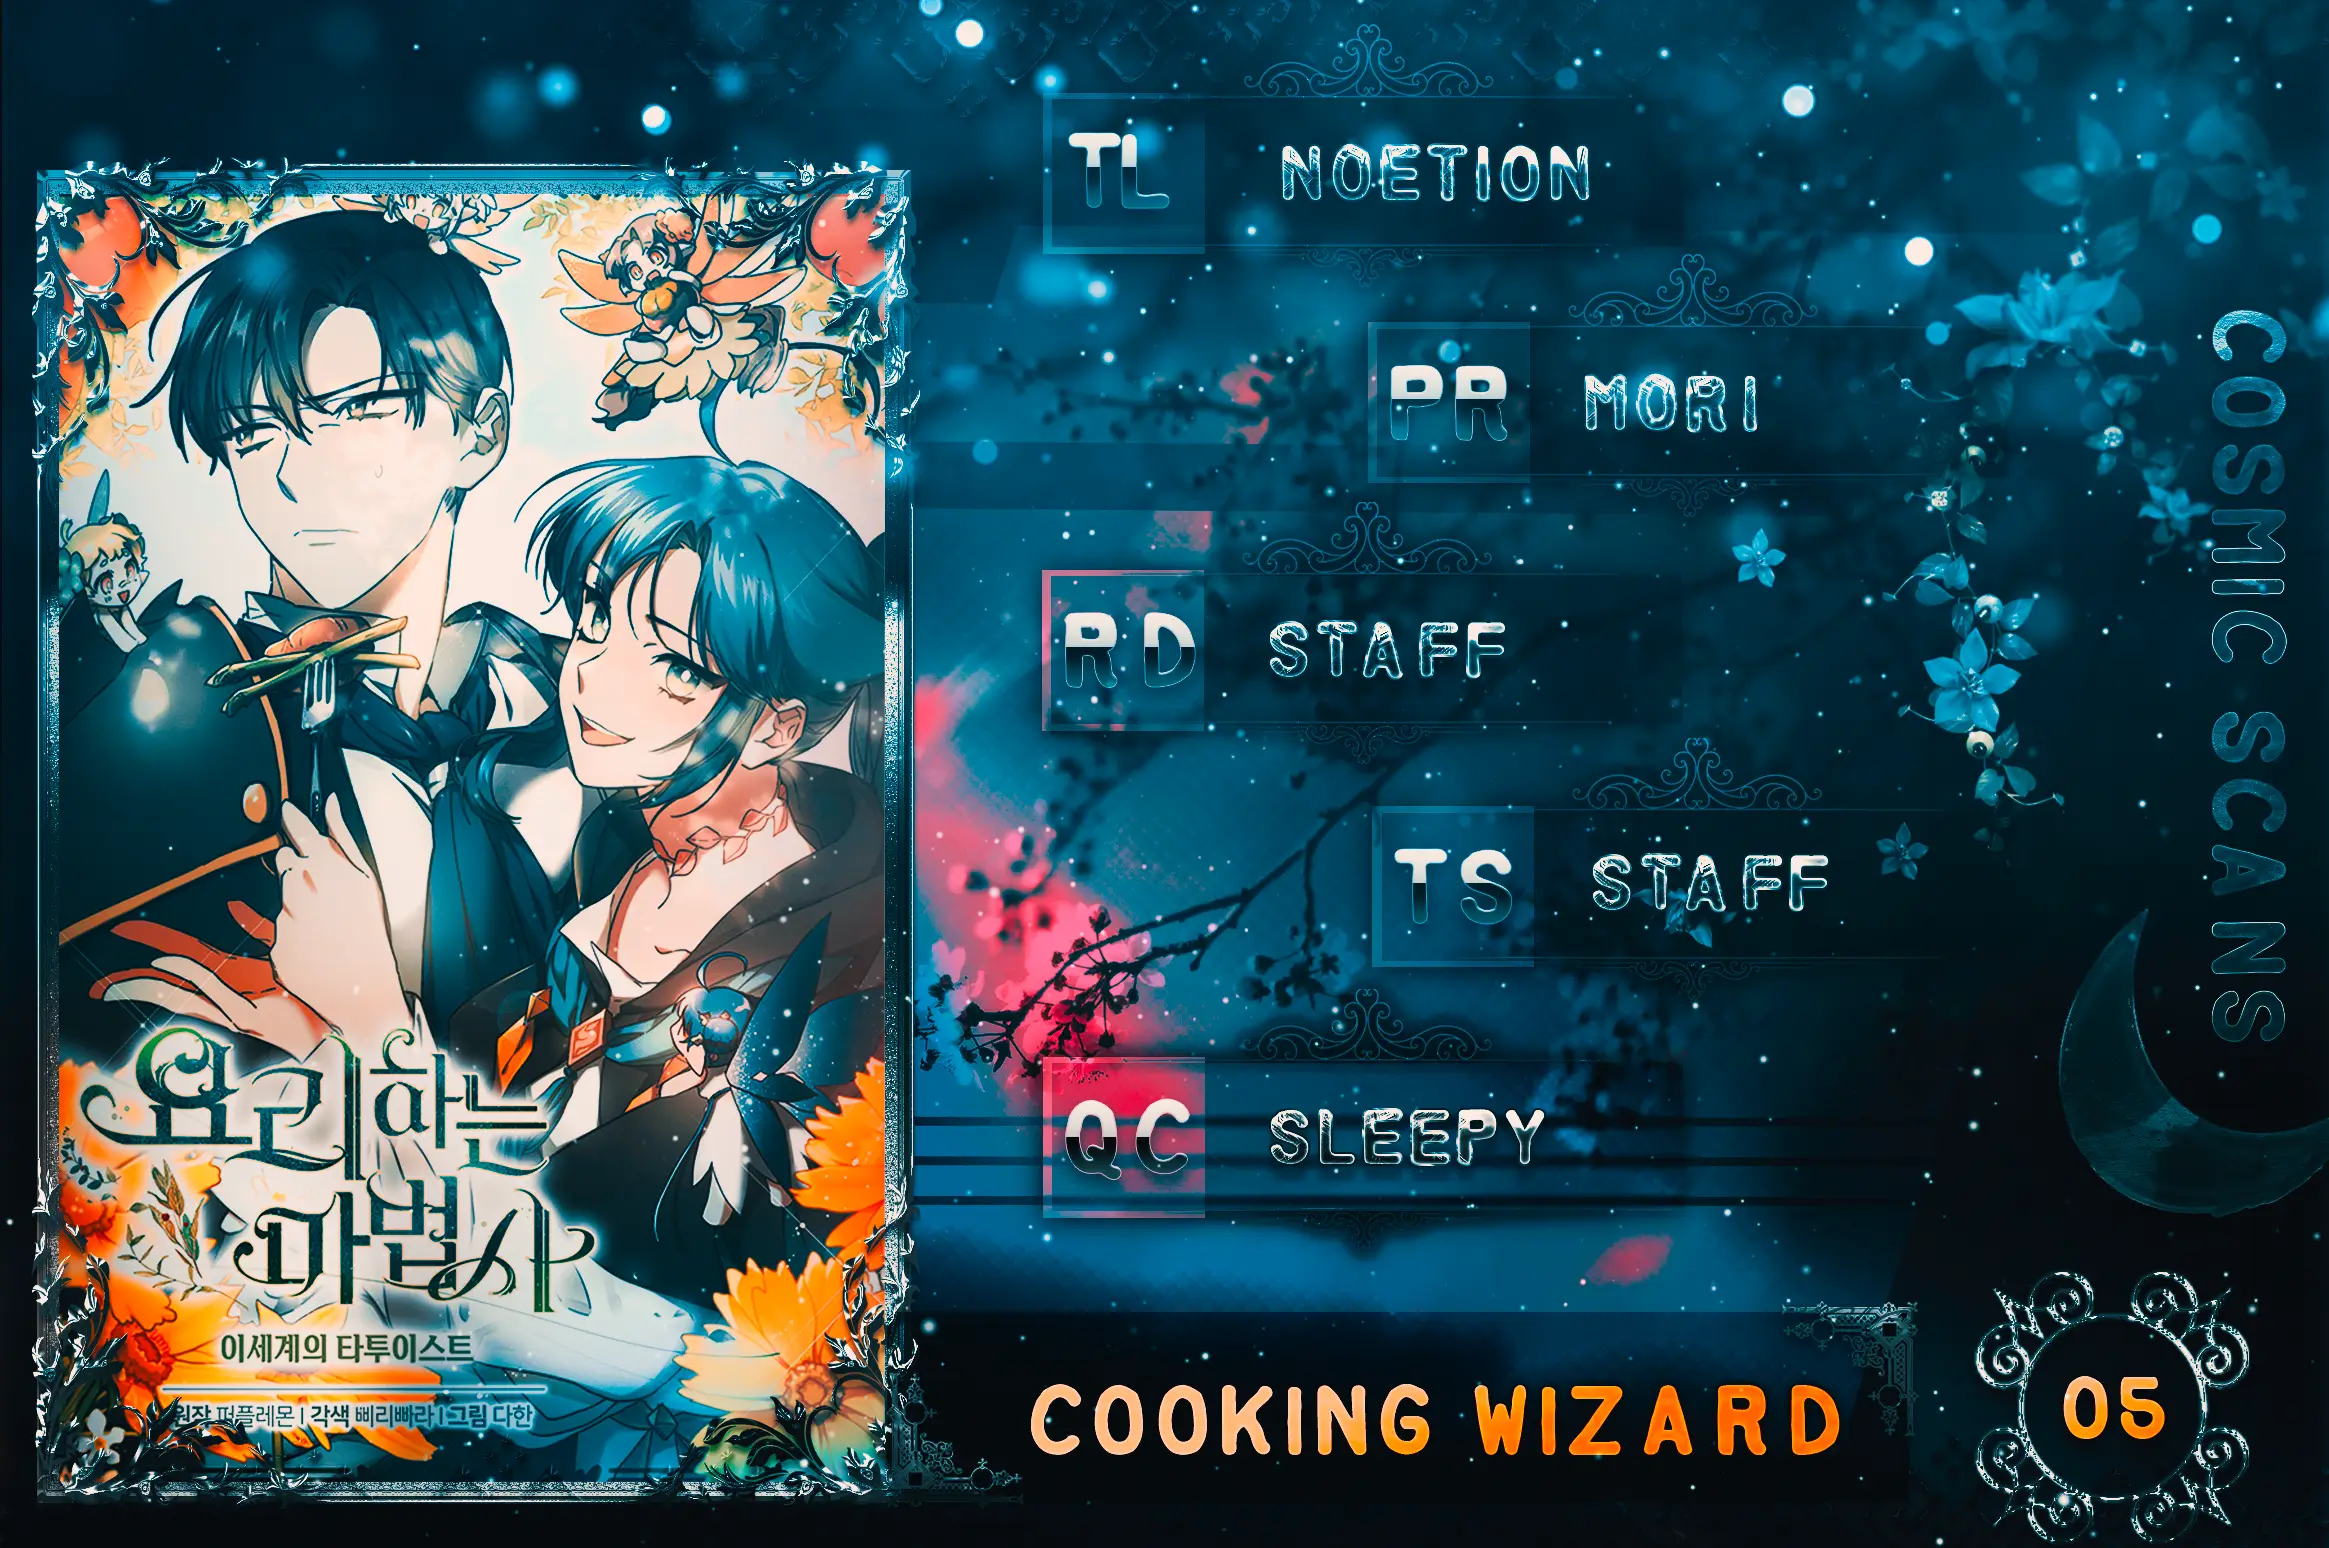 The Cooking Wizard chapter 5